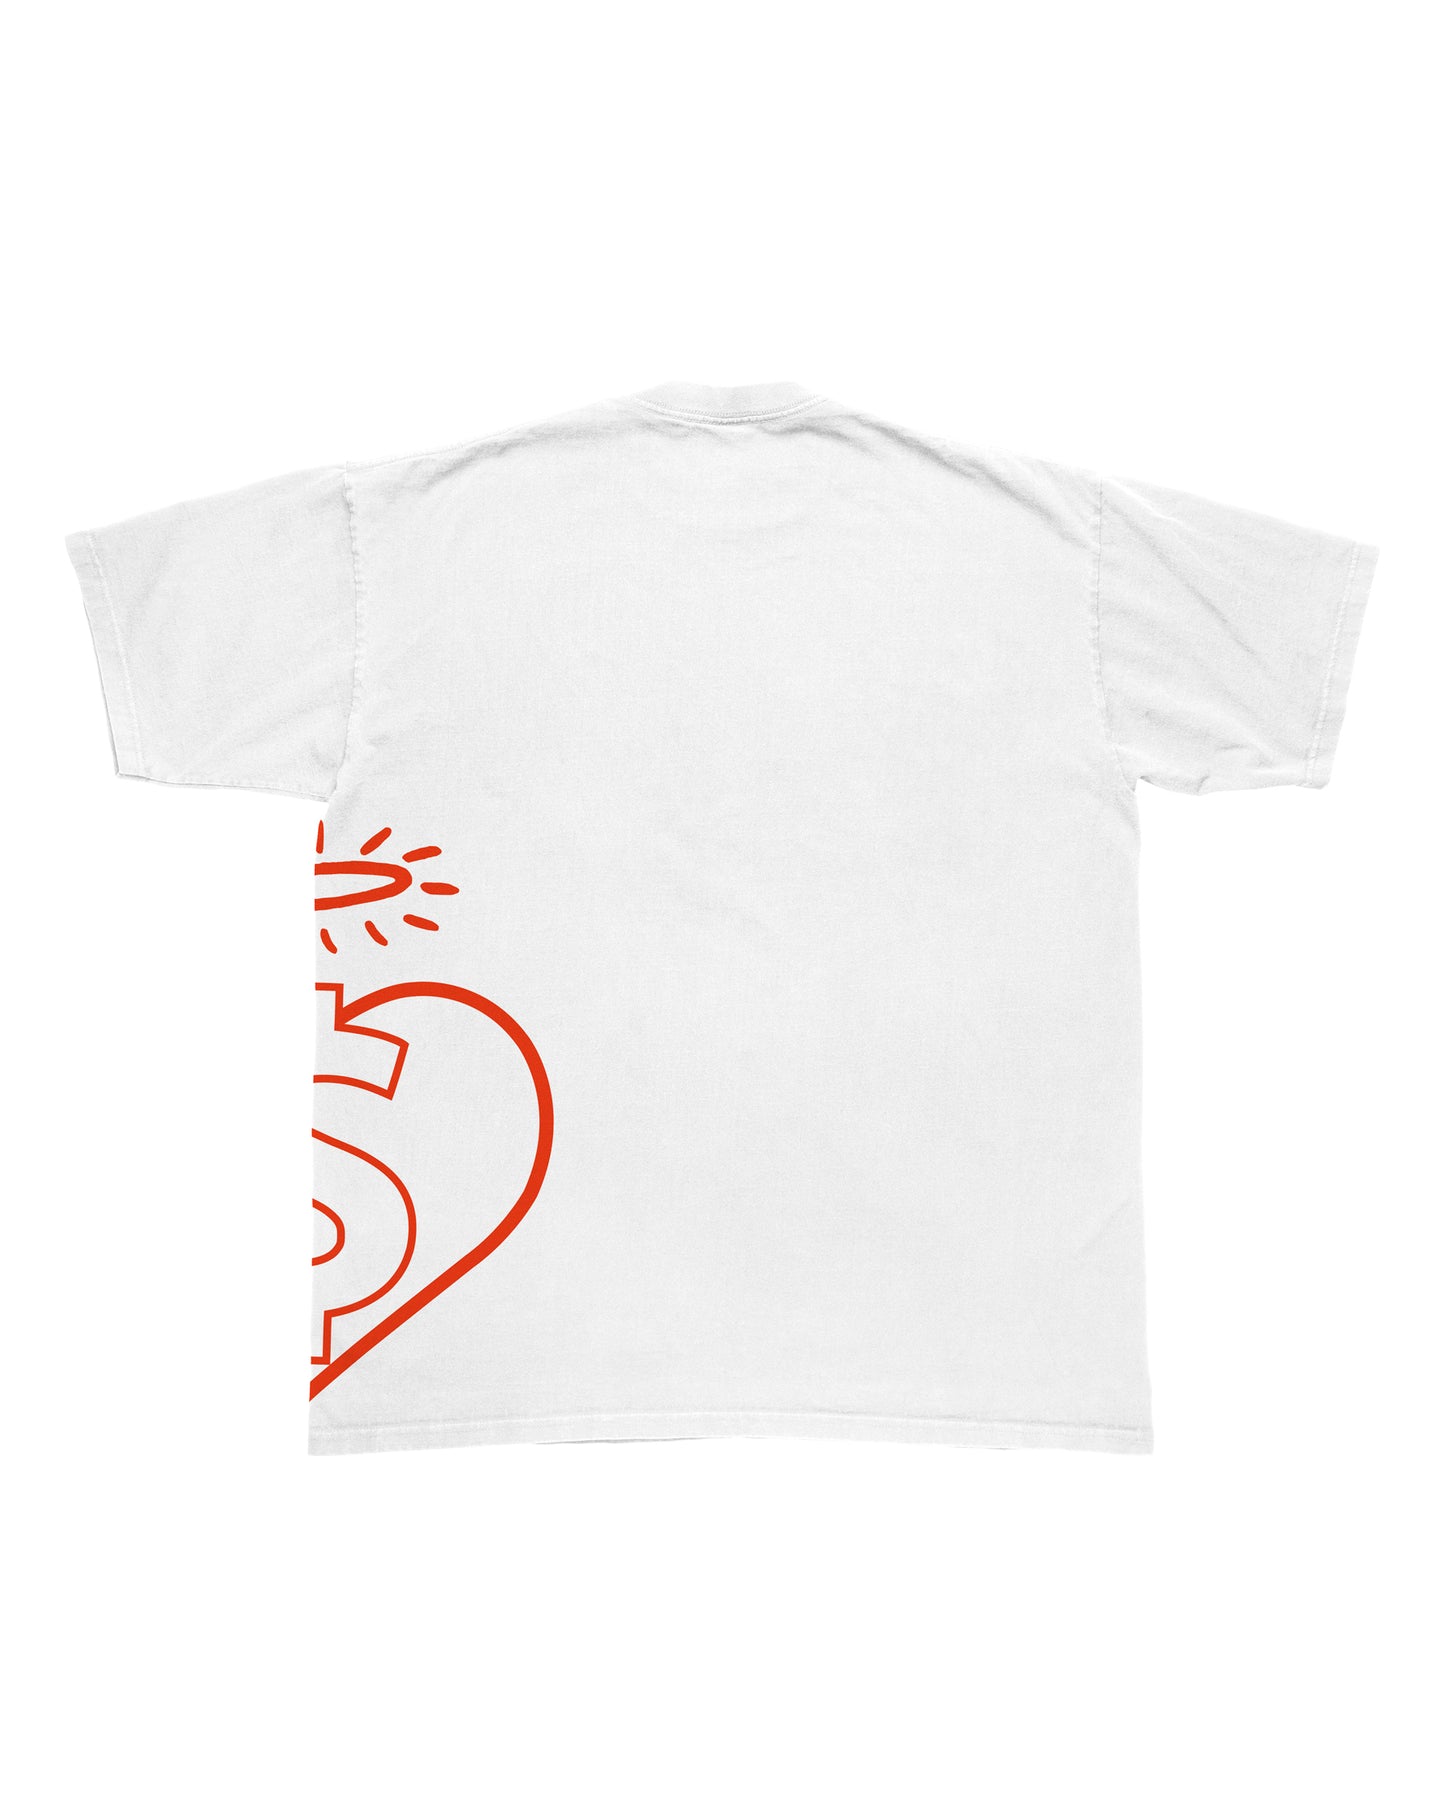 EVOL Side Logo Shirt White And Red